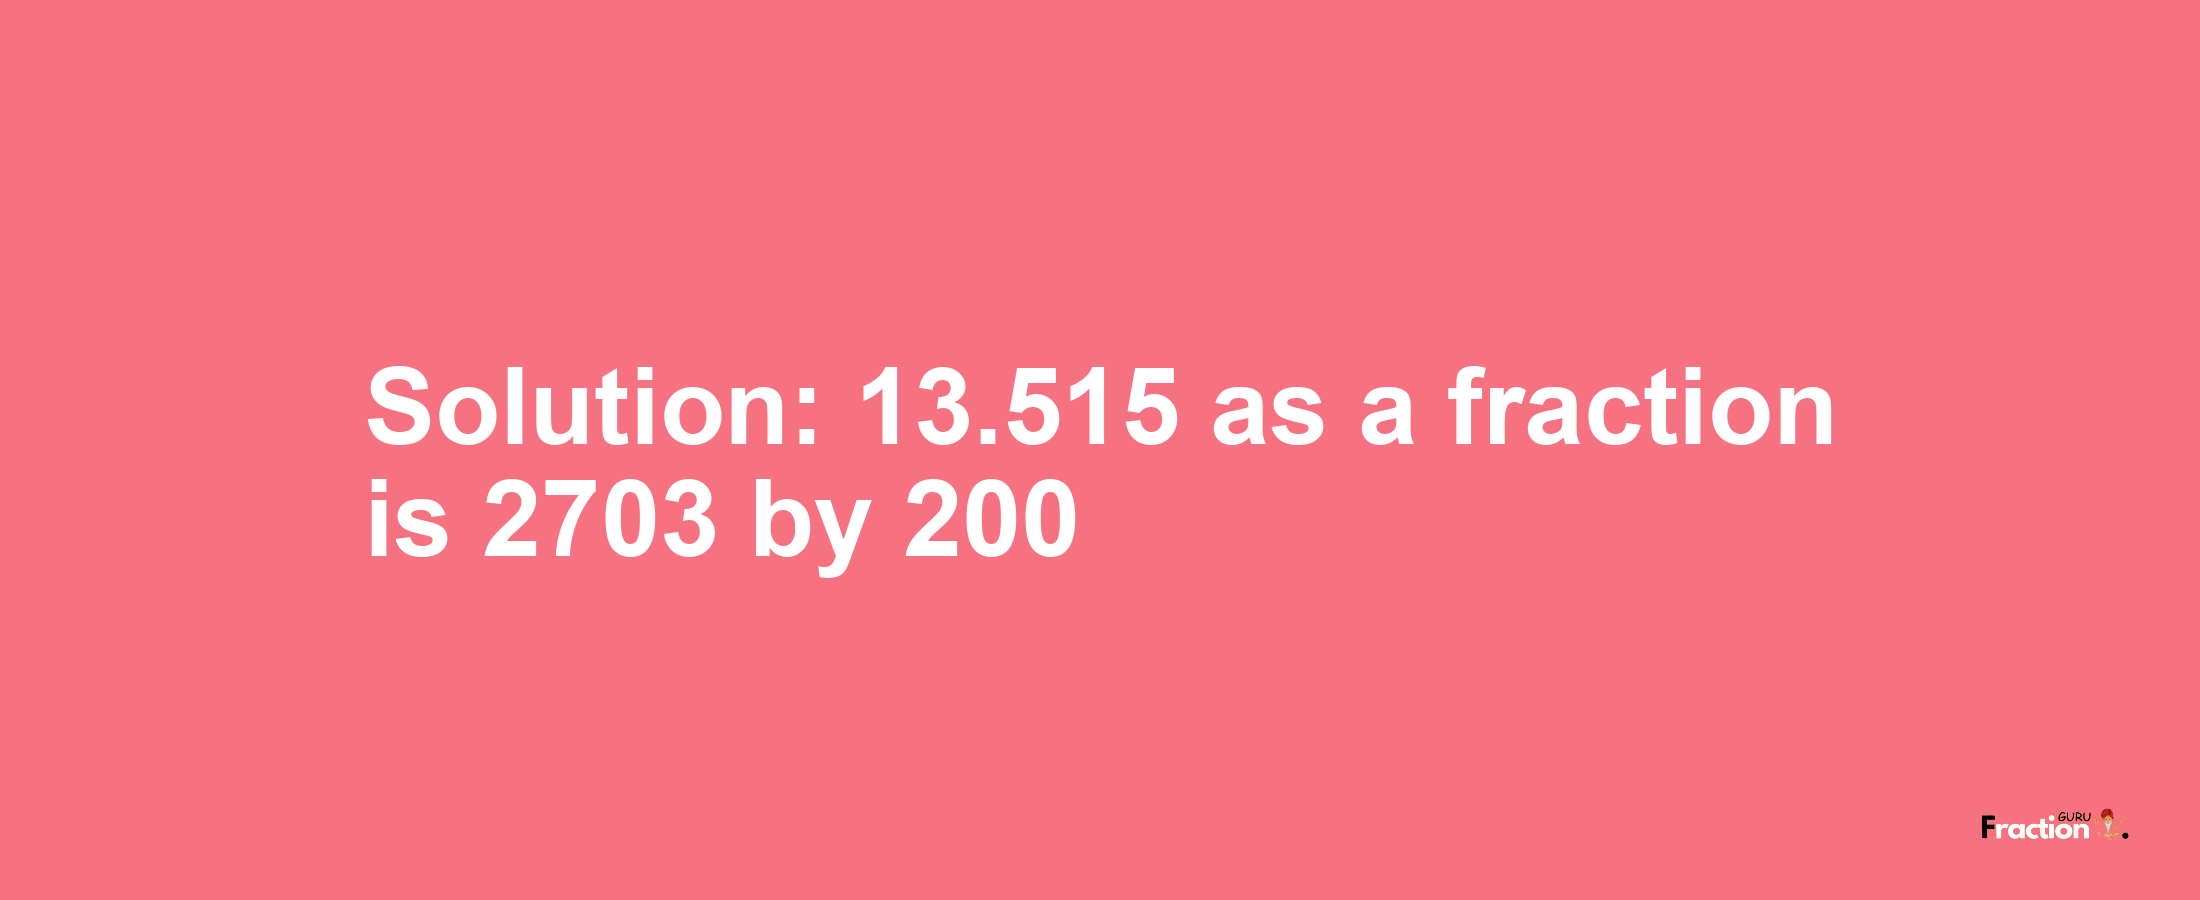 Solution:13.515 as a fraction is 2703/200